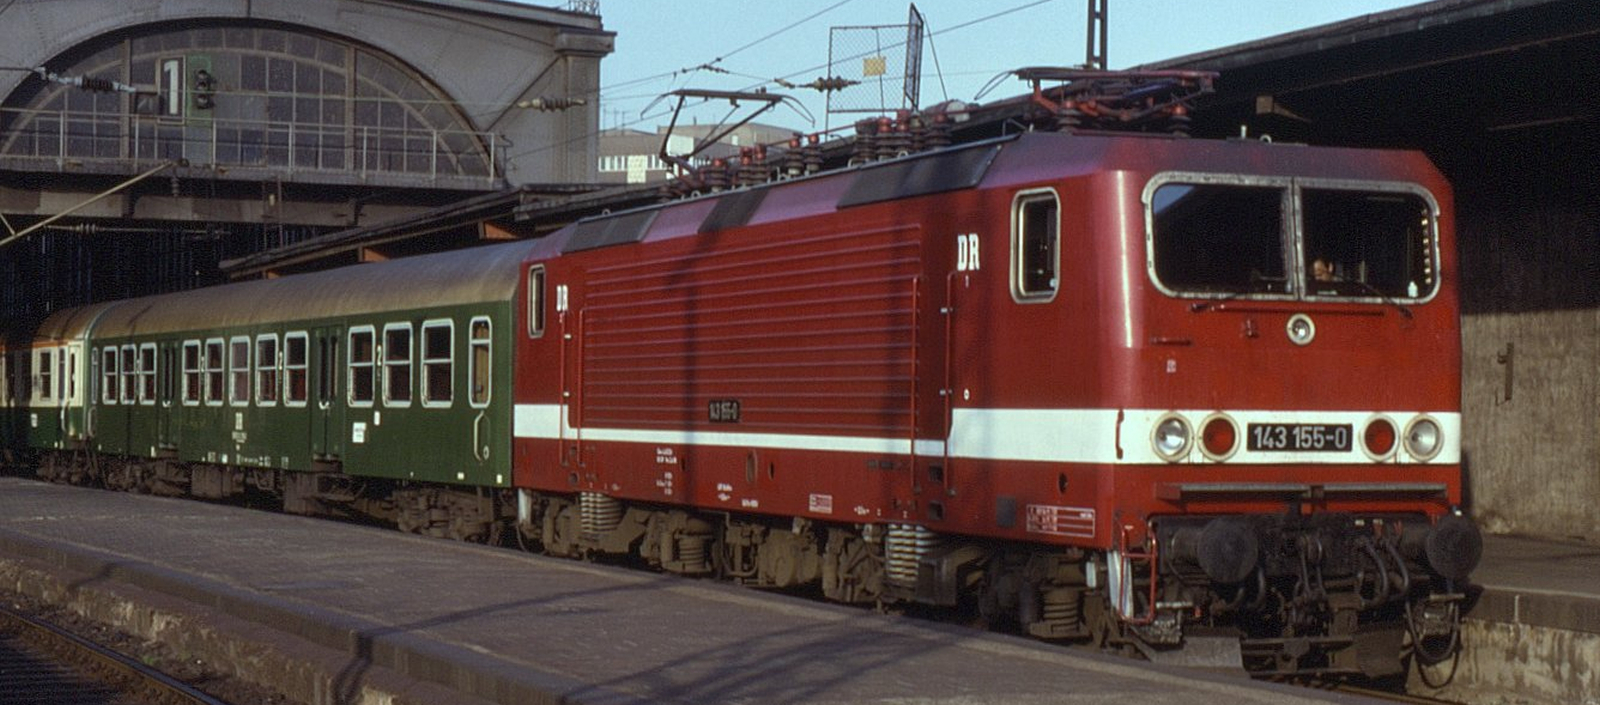 Already renumbered 143 155 in May 1992 in Dresden